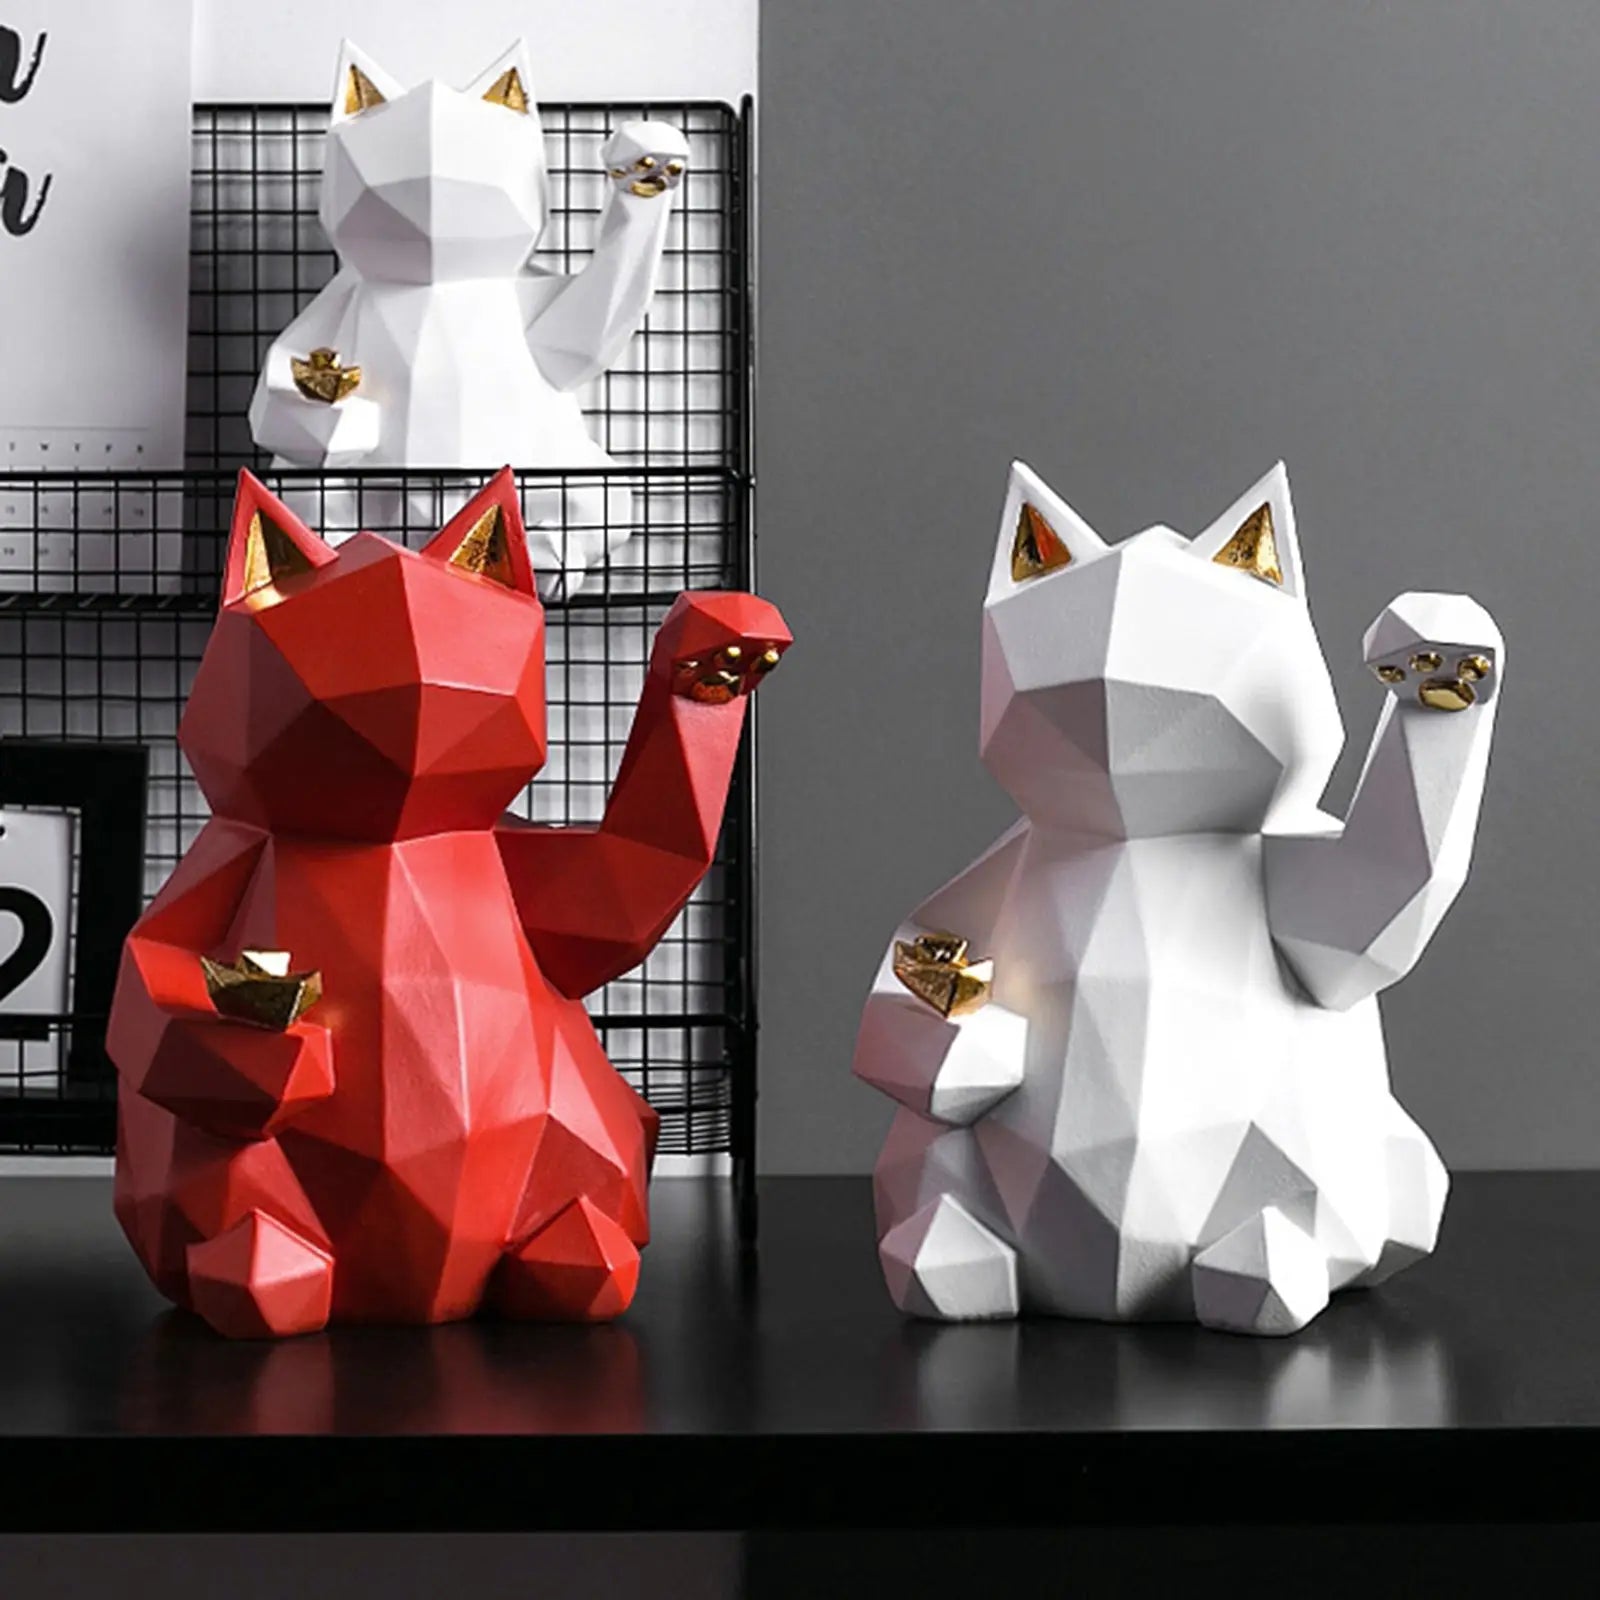 Sculpture Origami Blanche Chat Chanceux